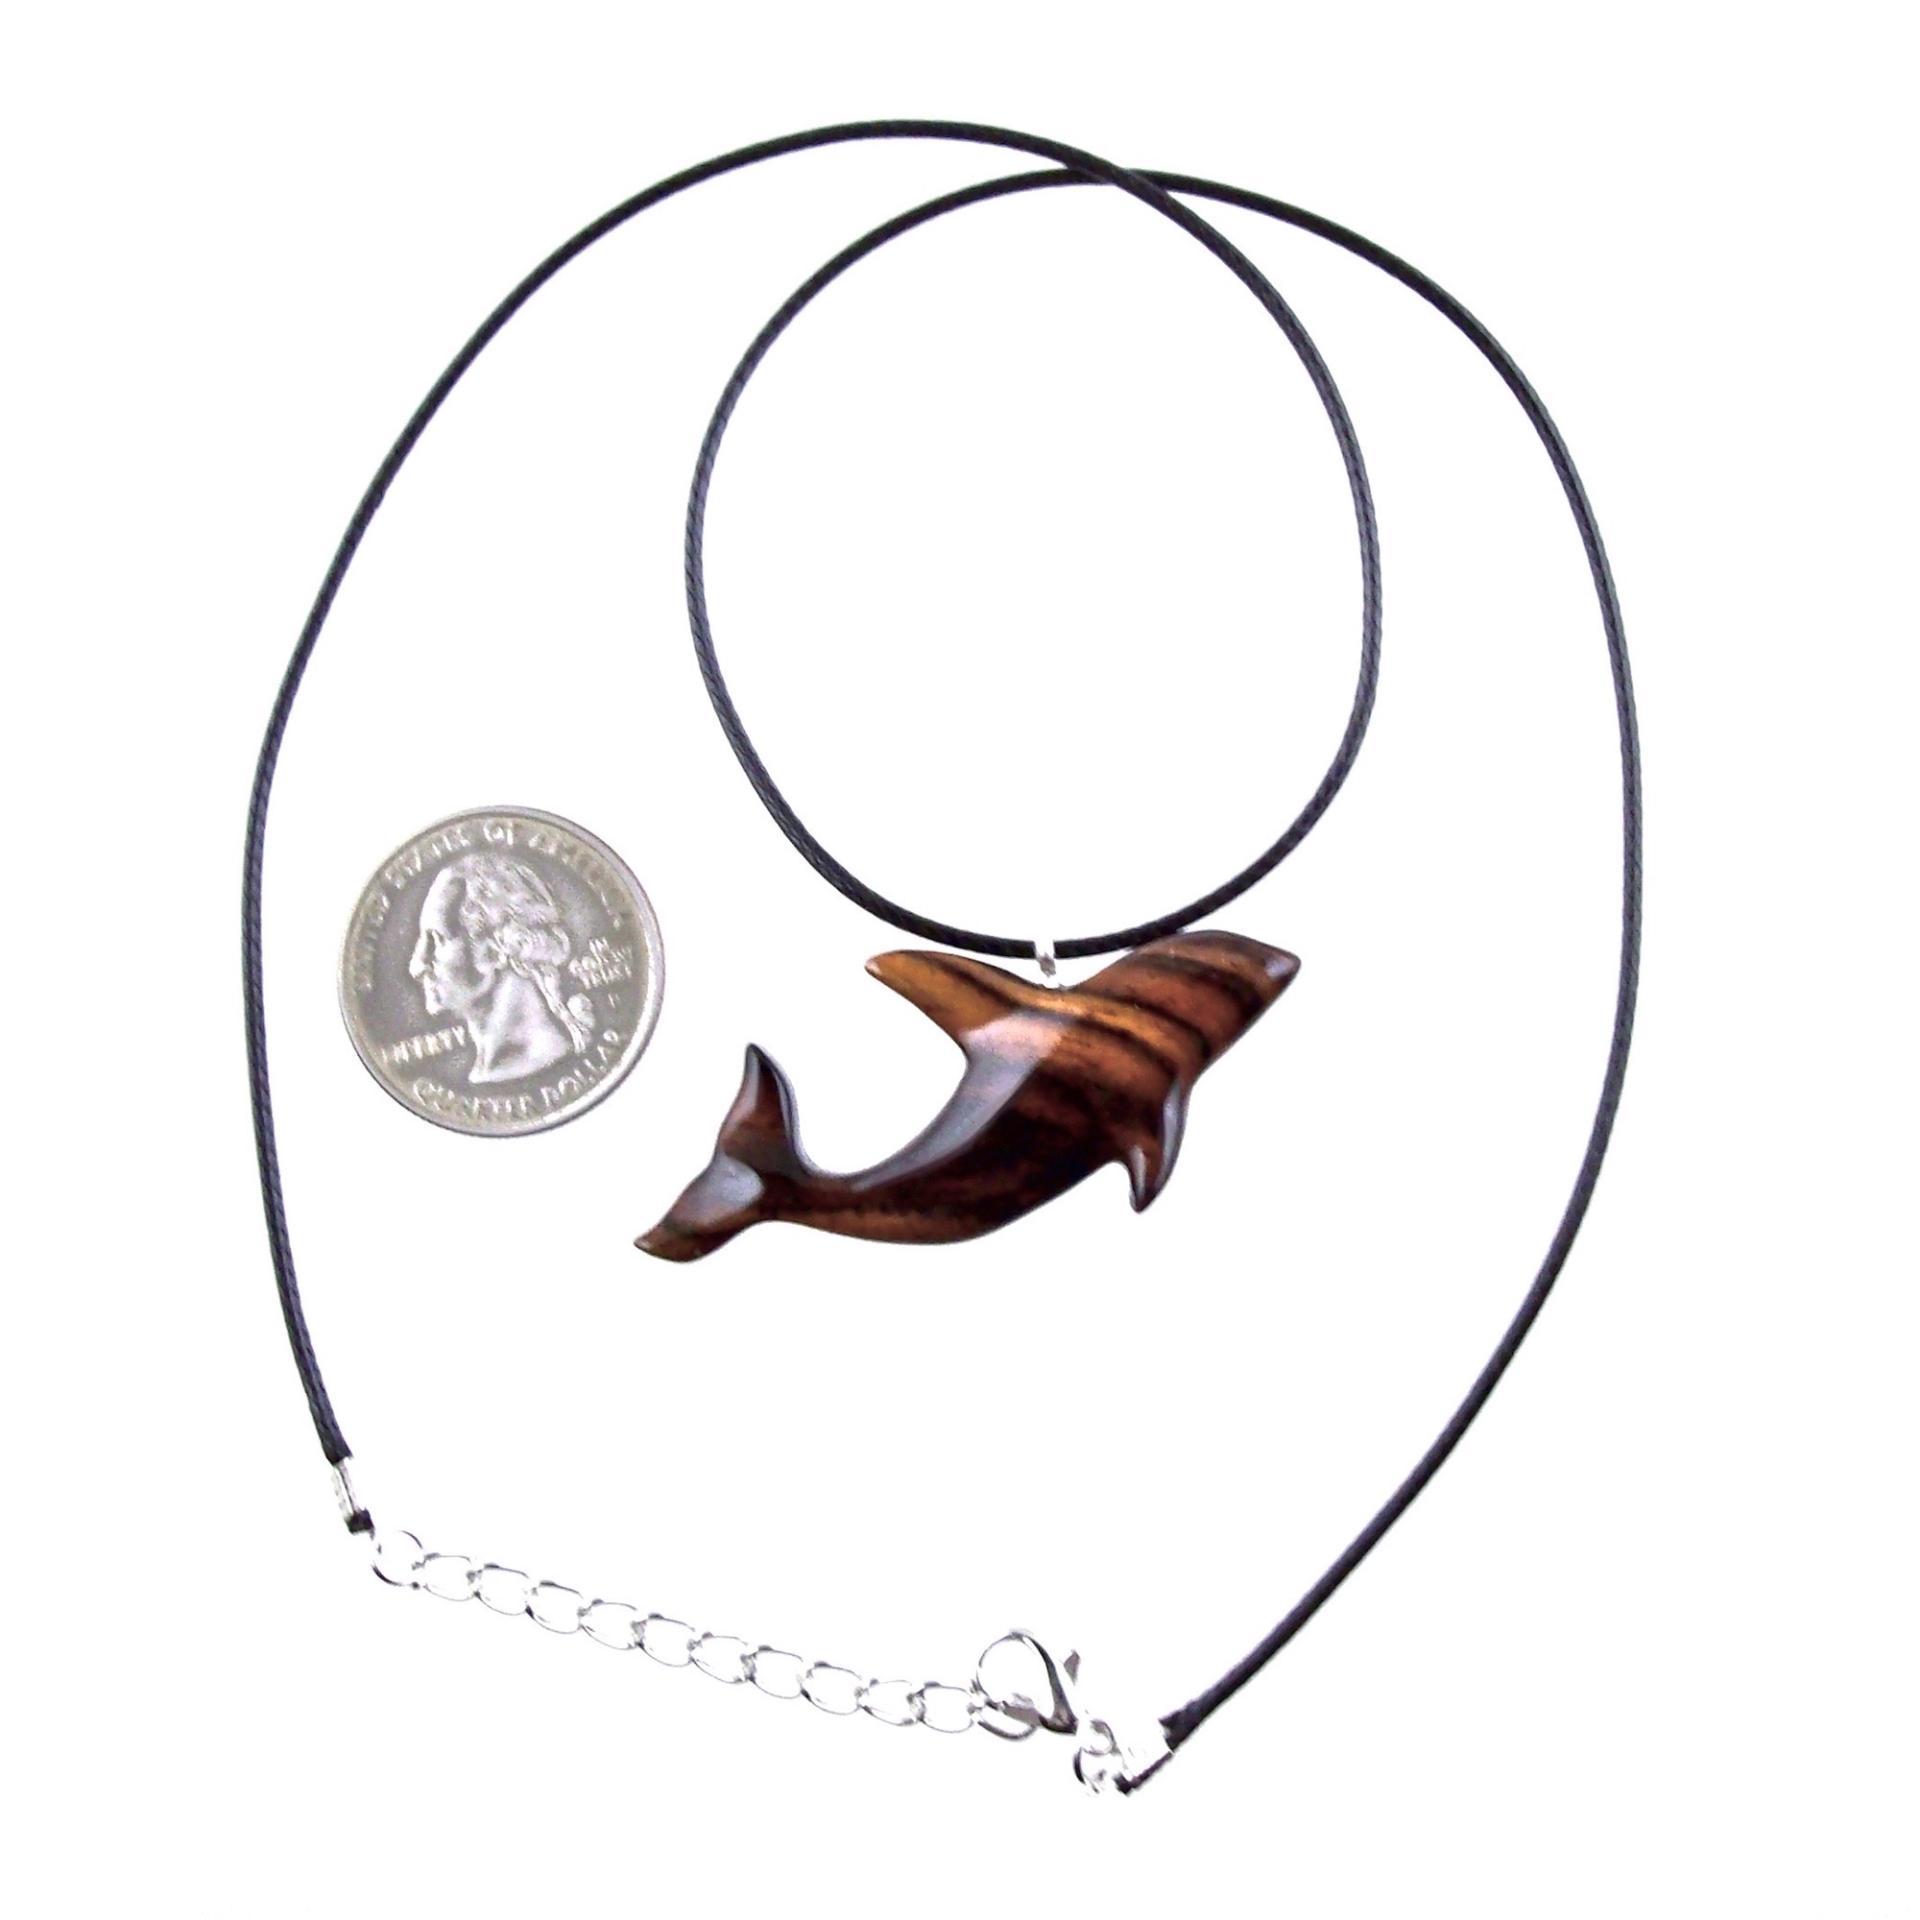 Orca Necklace, Hand Carved Killer Whale Pendant for Men or Women, Wooden Sea Animal, Nautical Wood Jewelry, One of a Kind  Gift for Him Her